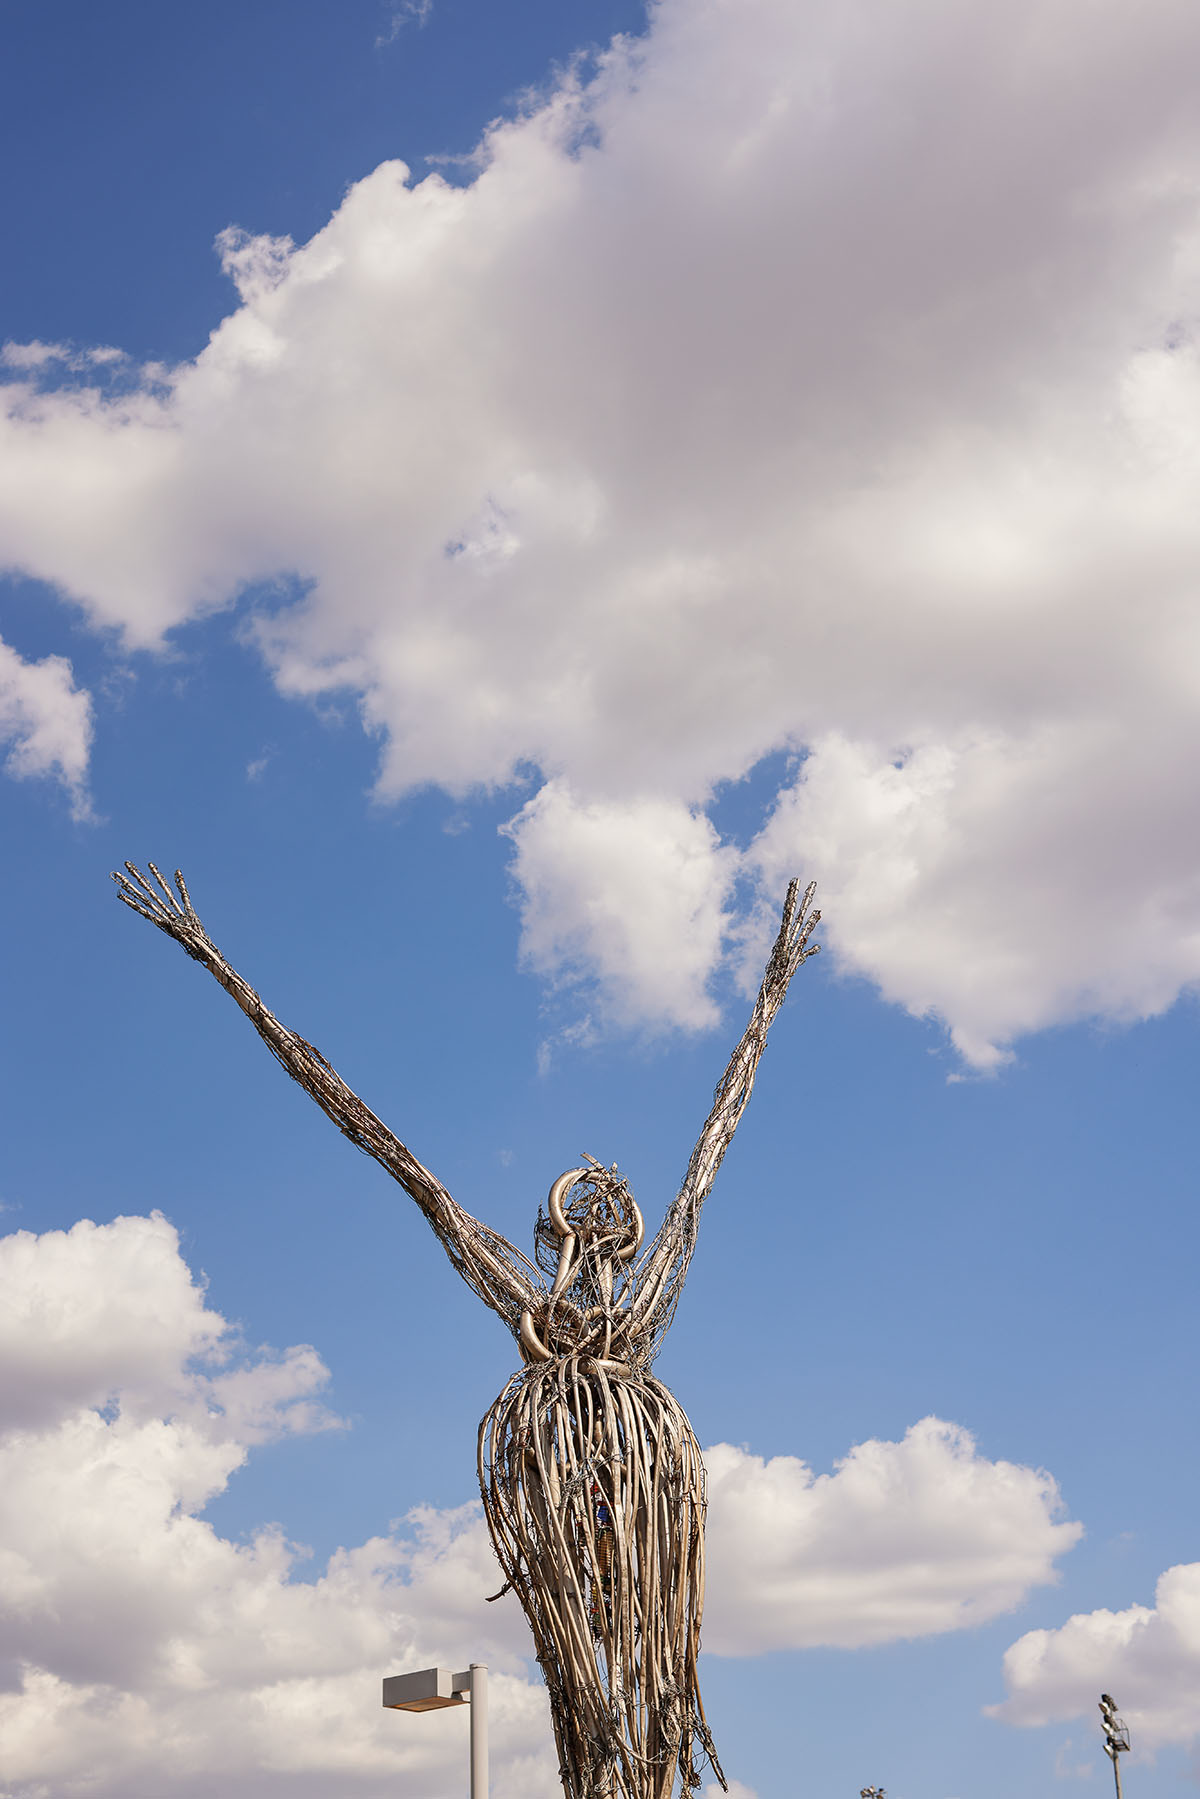 A tall sculpture made of pieces of metal shaped to look like a figure reaching up its arms in front of a blue sky